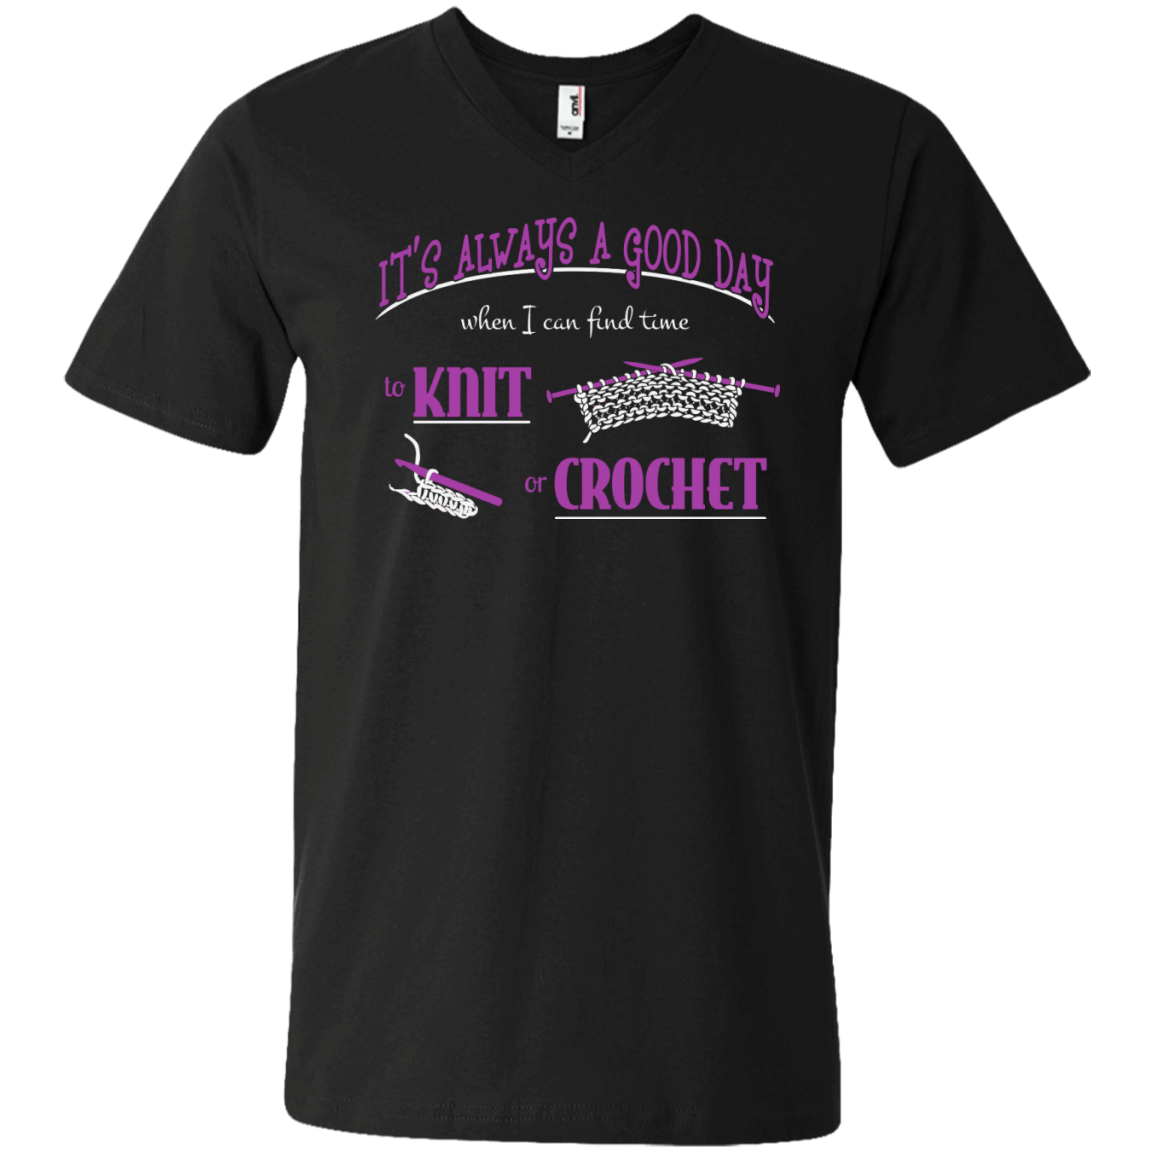 Good Day to Knit or Crochet Men's and Unisex T-Shirts - Crafter4Life - 7